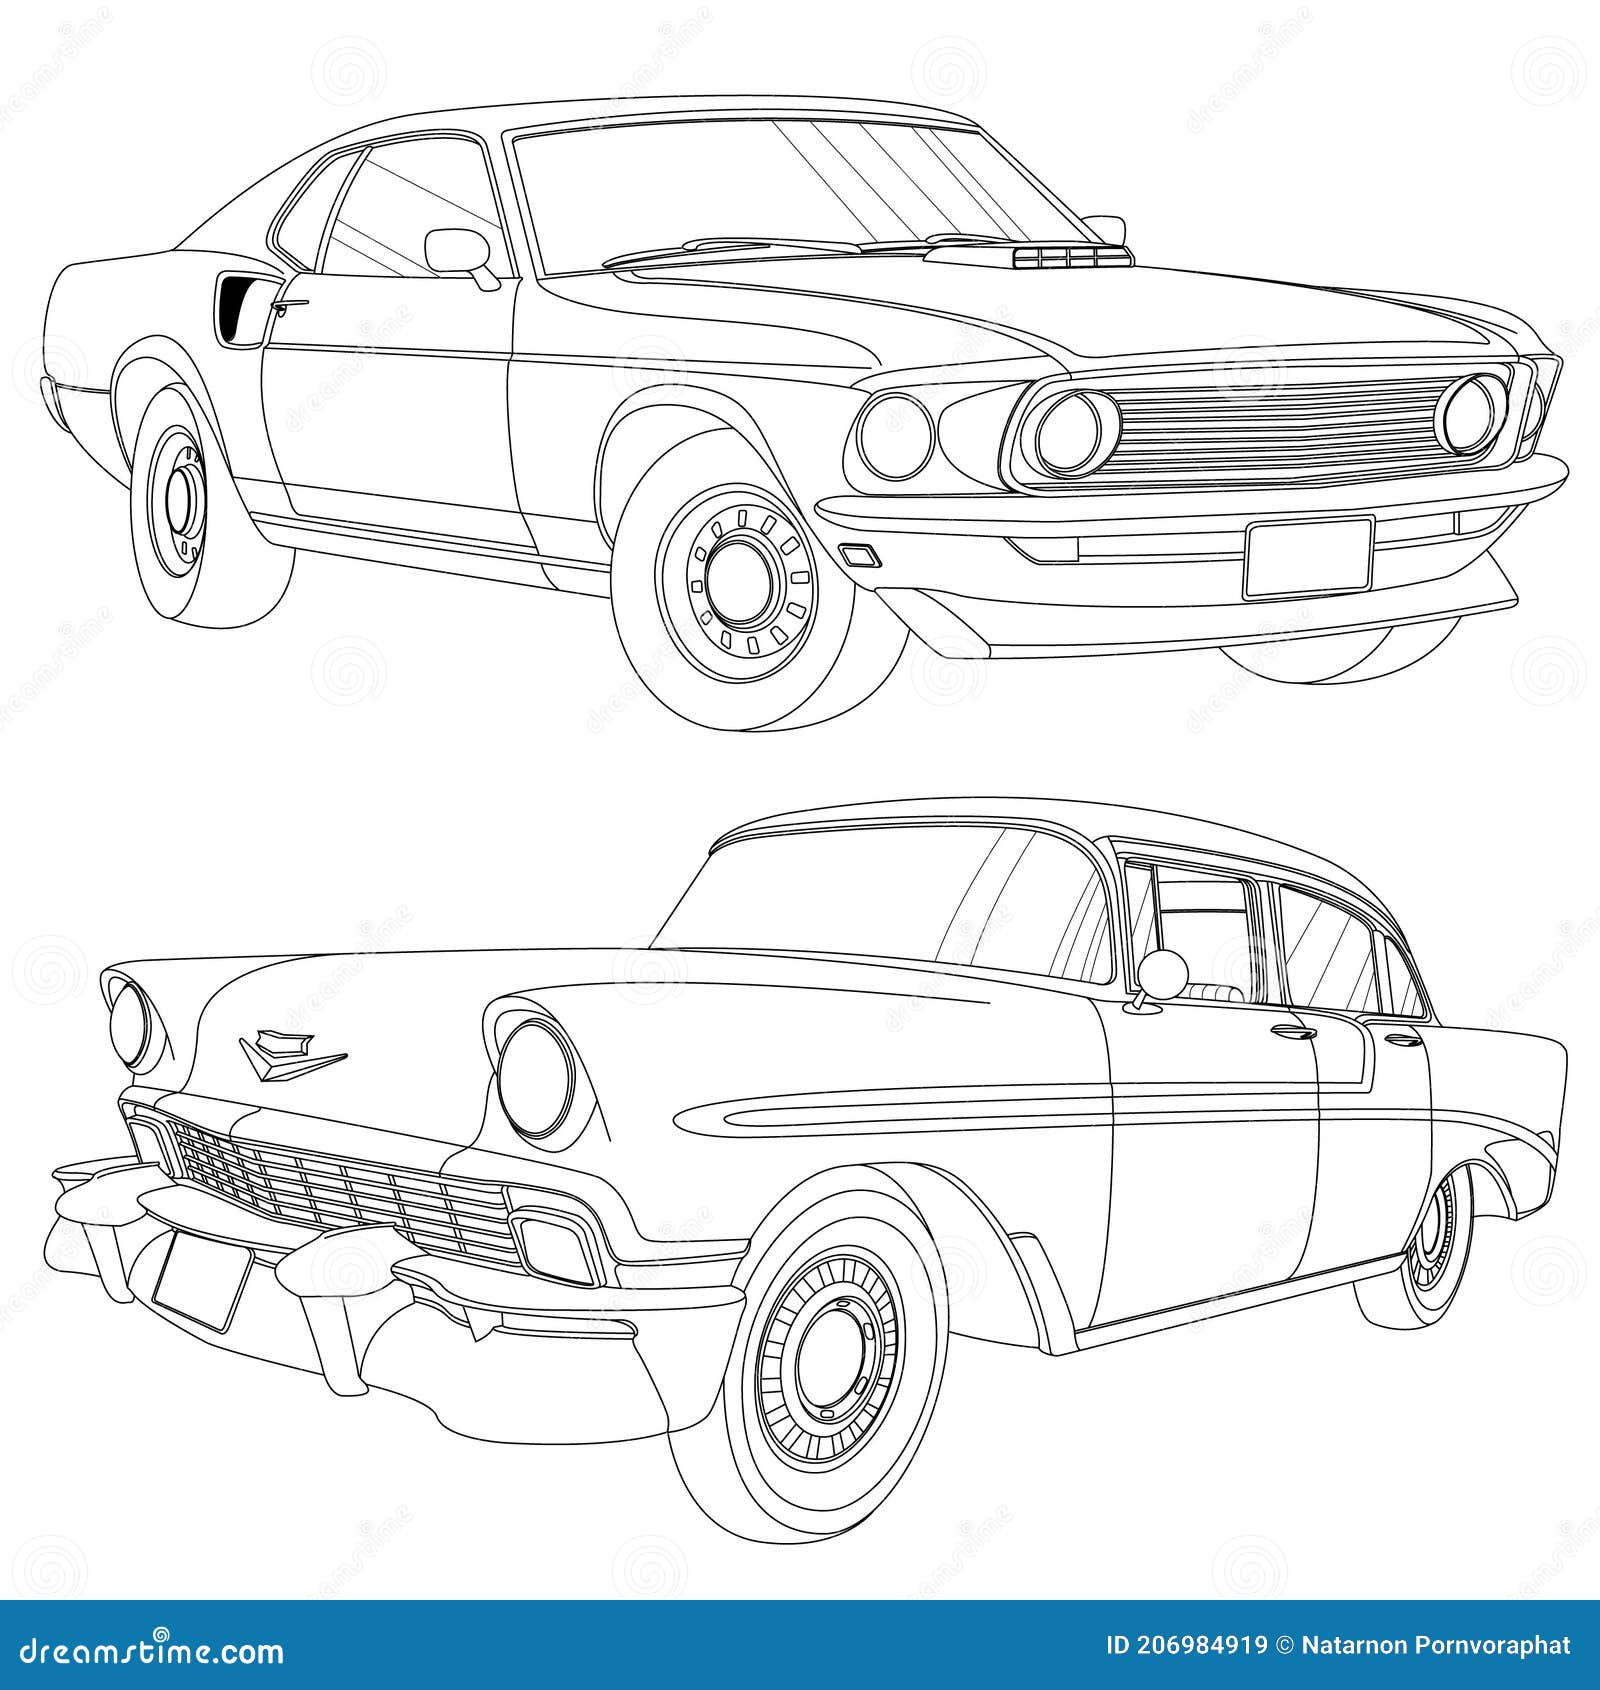 How to draw a car - Ford Mustang - Step by step - YouTube